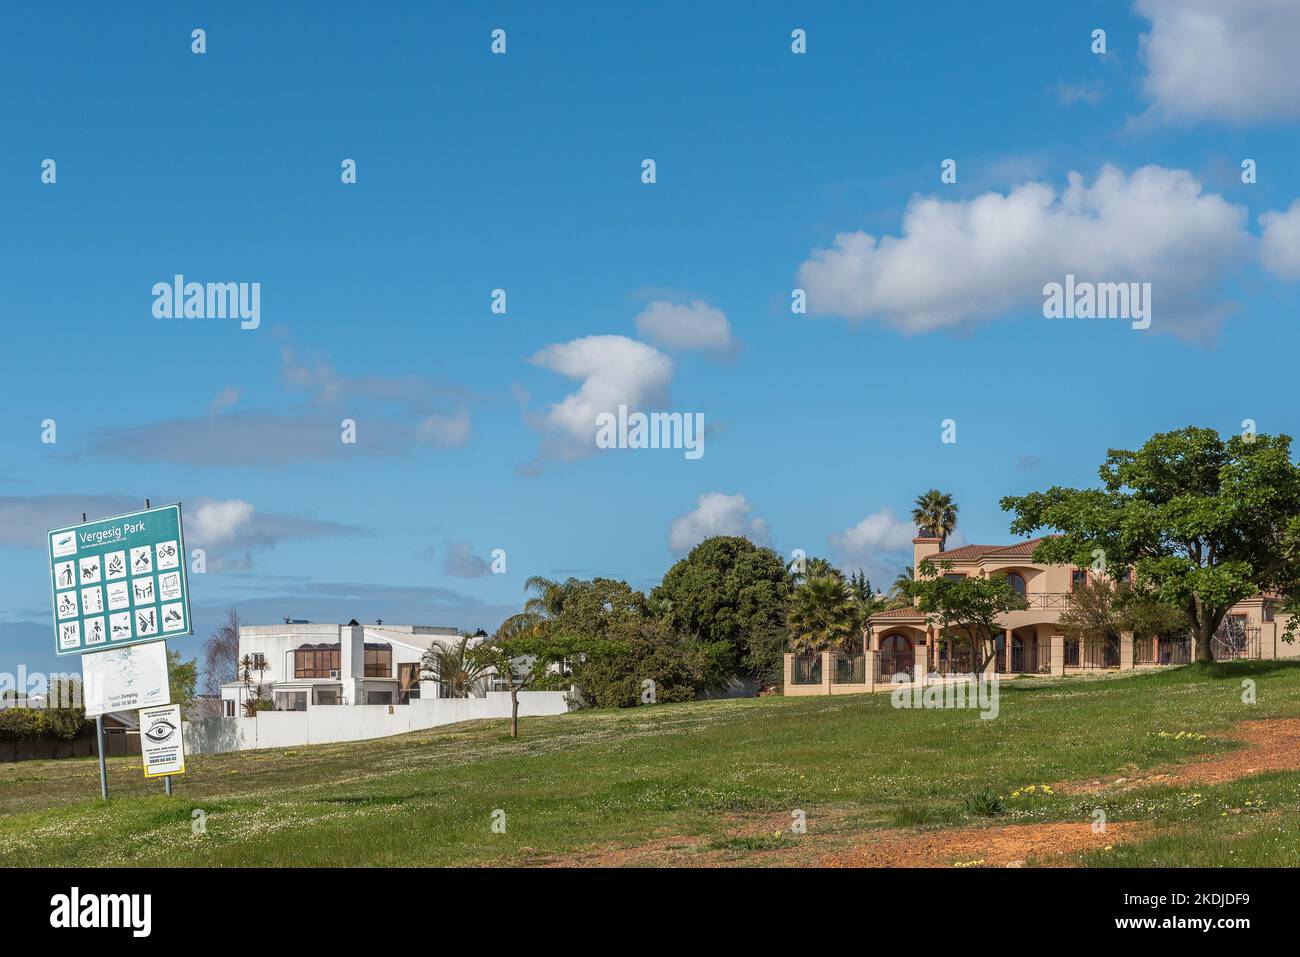 DURBANVILLE, SOUTH AFRICA - SEP 12, 2022: A street scene, with the Vergesig Park and luxury houses, in Durbanville in the Cape Town metroplitan area Stock Photo